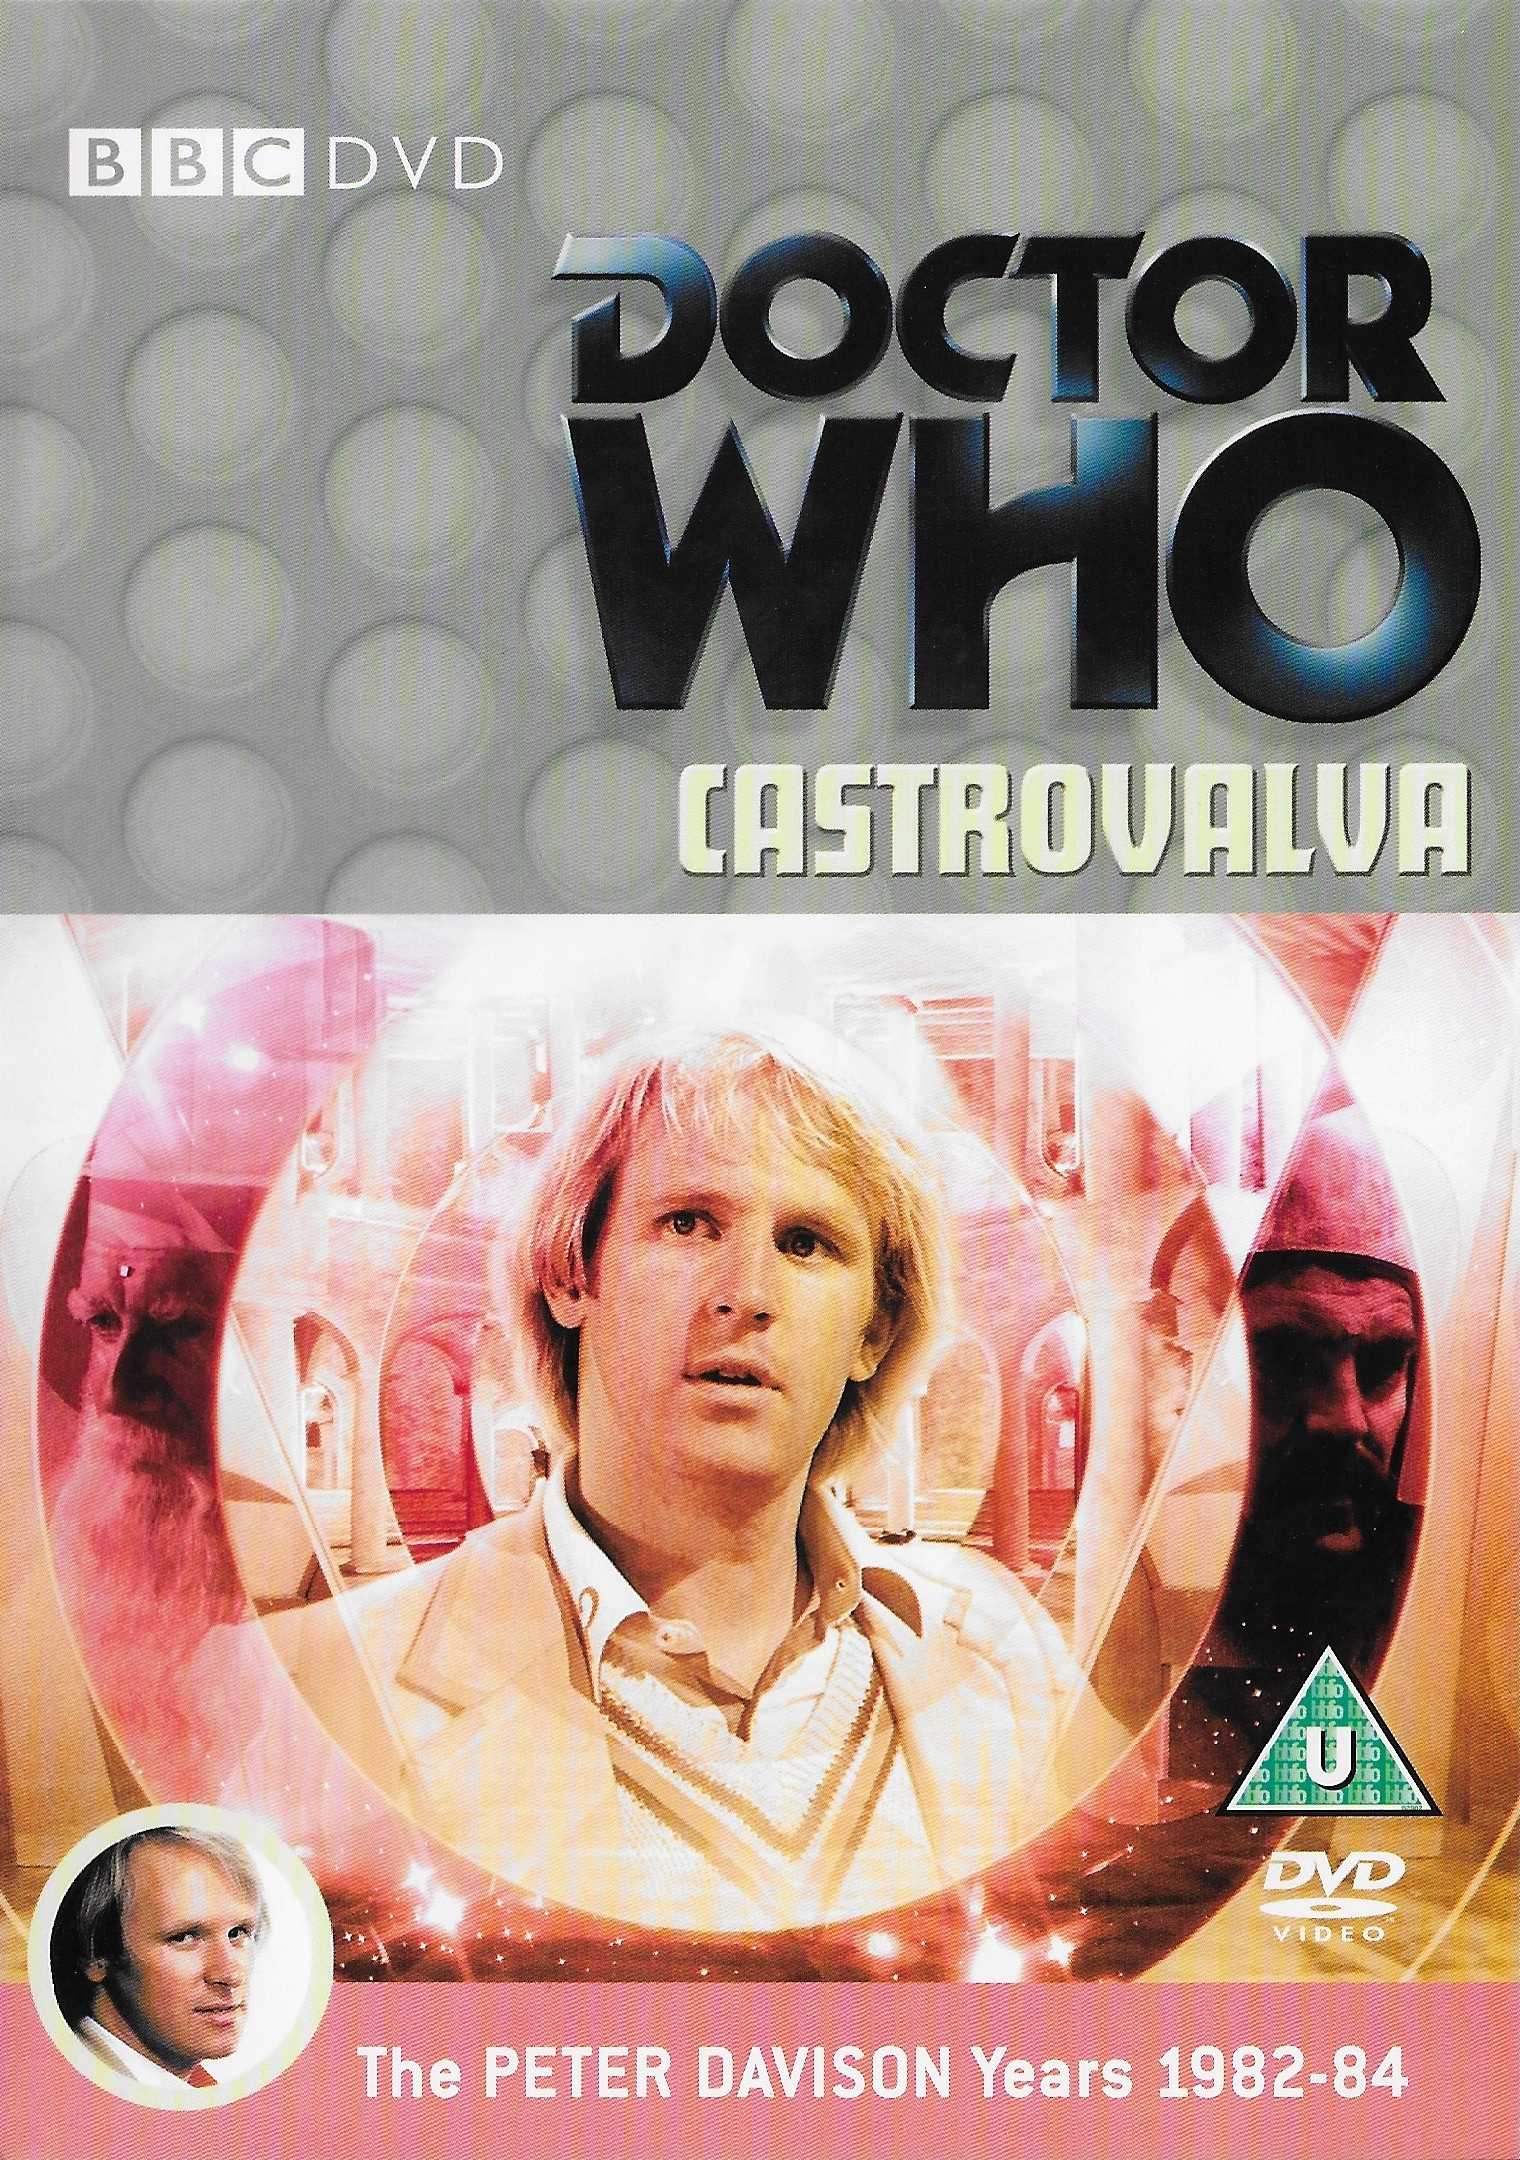 Picture of BBCDVD 1331C Doctor Who - Castrovalva by artist Christopher H Bidmead from the BBC dvds - Records and Tapes library